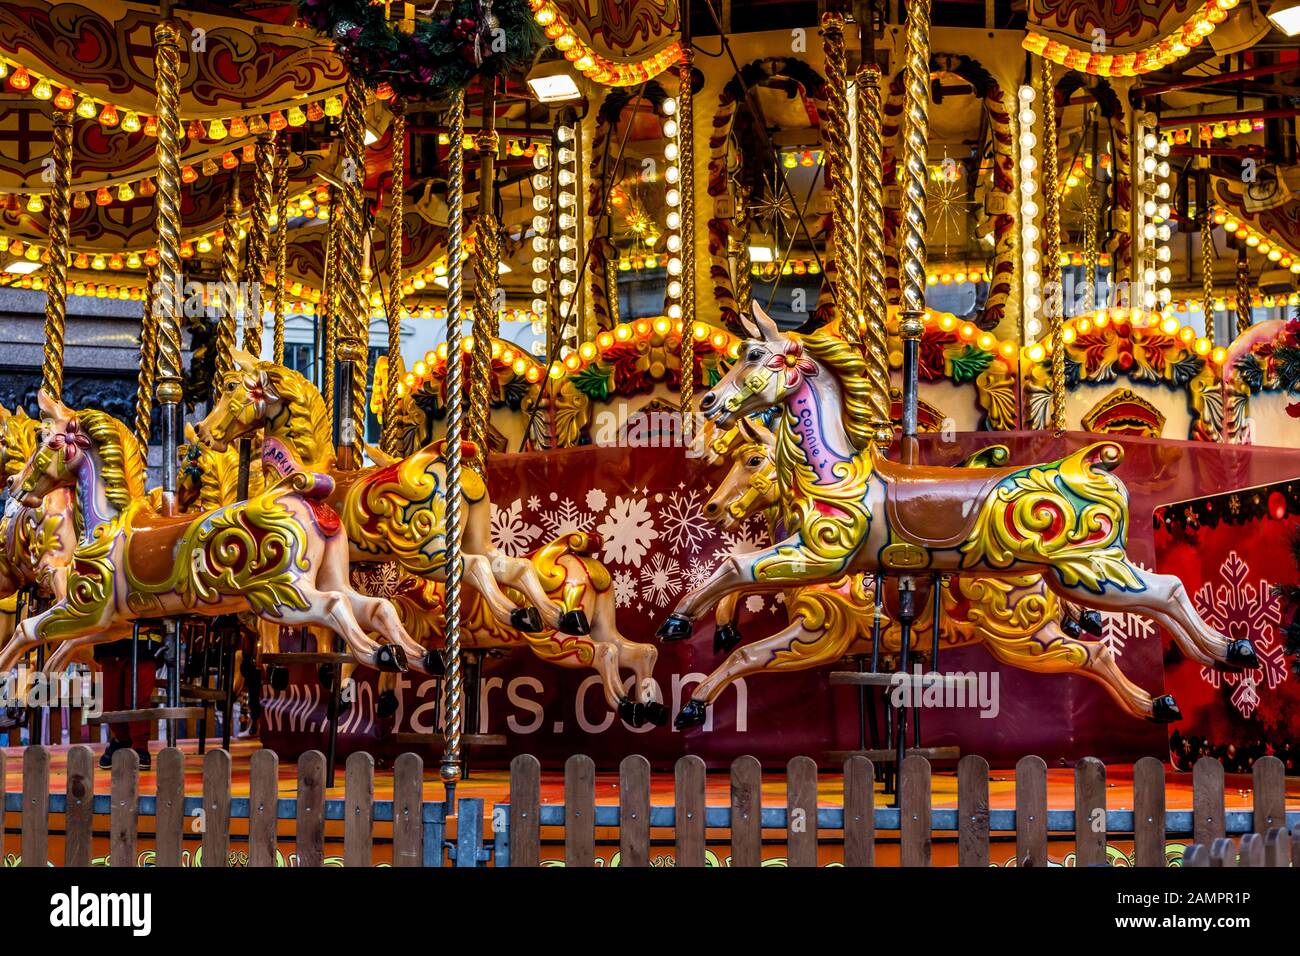 Yellow Vintage merry-go-round wooden horses in carusel Stock Photo